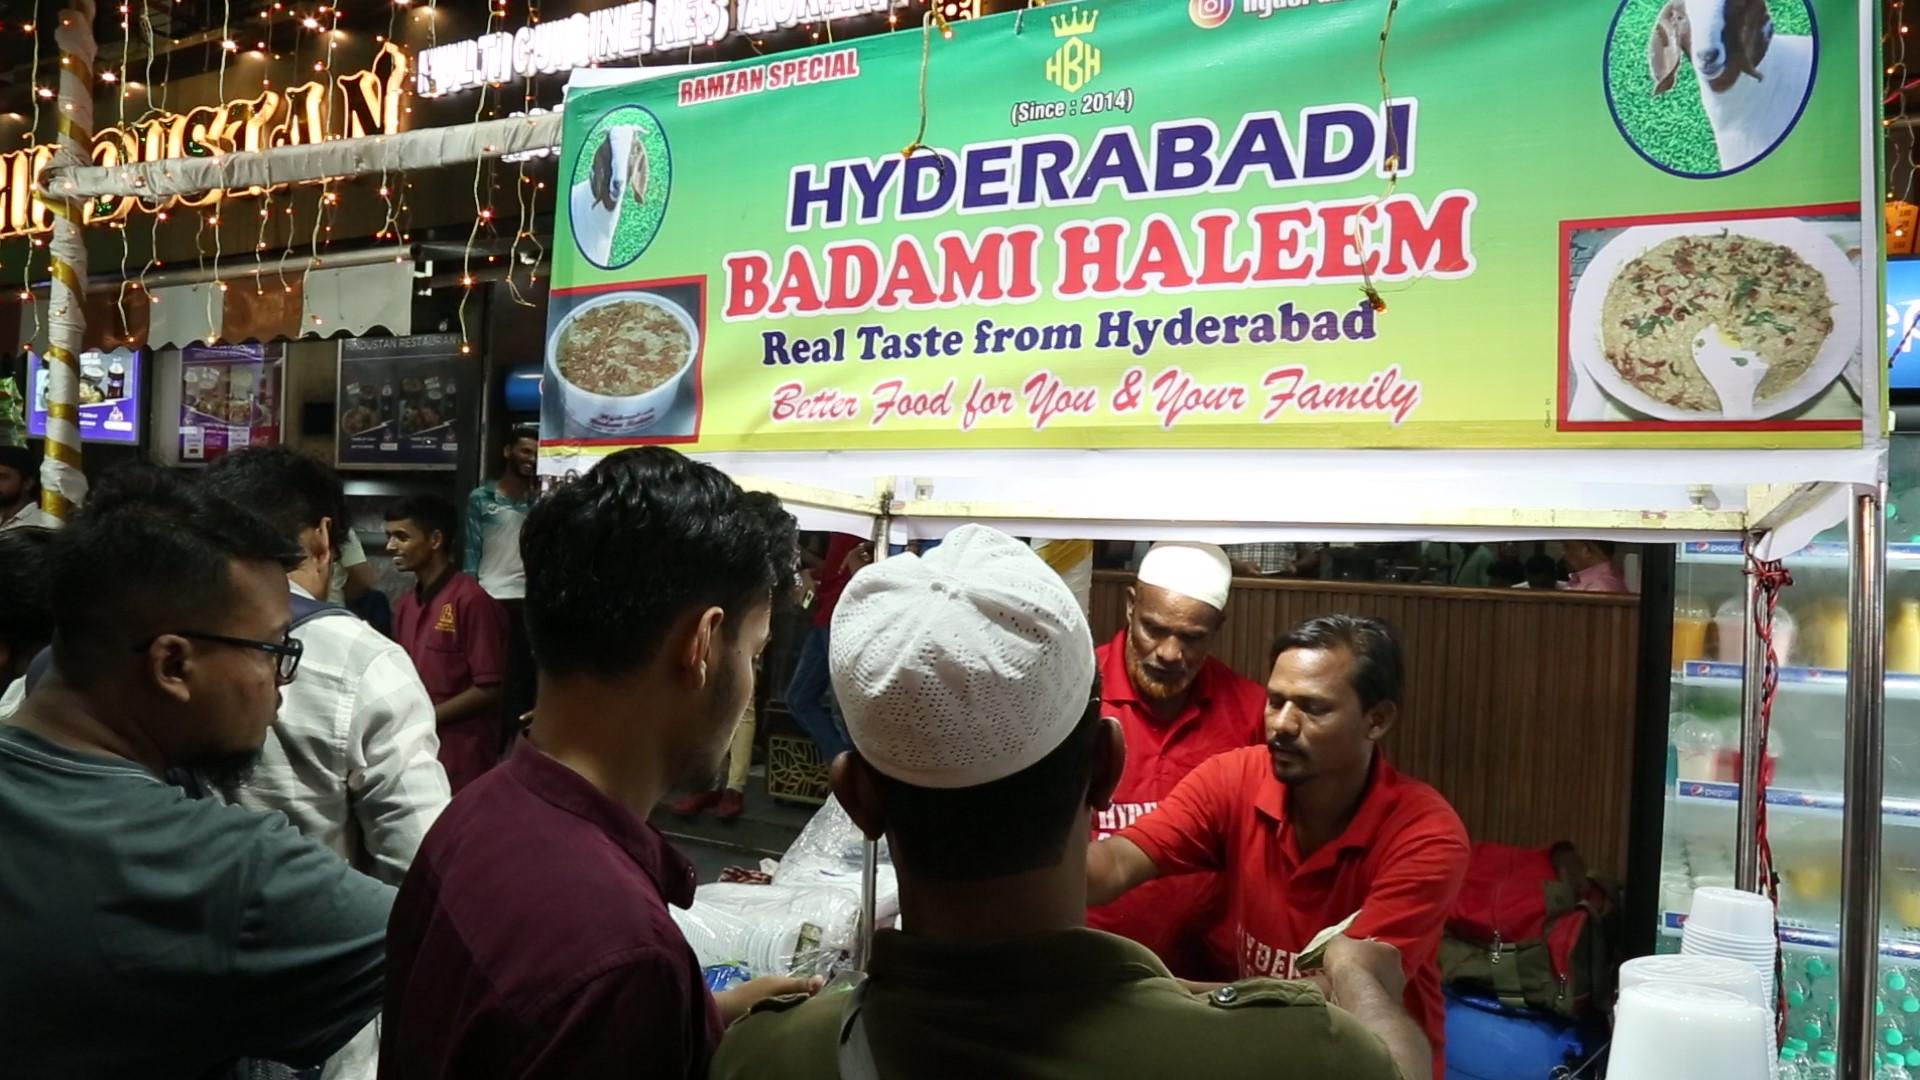 Haleem: Haleem is a traditional Hyderabadi delicacy made from minced mutton. Savour this rich and aromatic dish, a traditional Ramadan delicacy, simmered to perfection with tender meat and lentils at Hyderabadi Badami Haleem priced at Rs 130